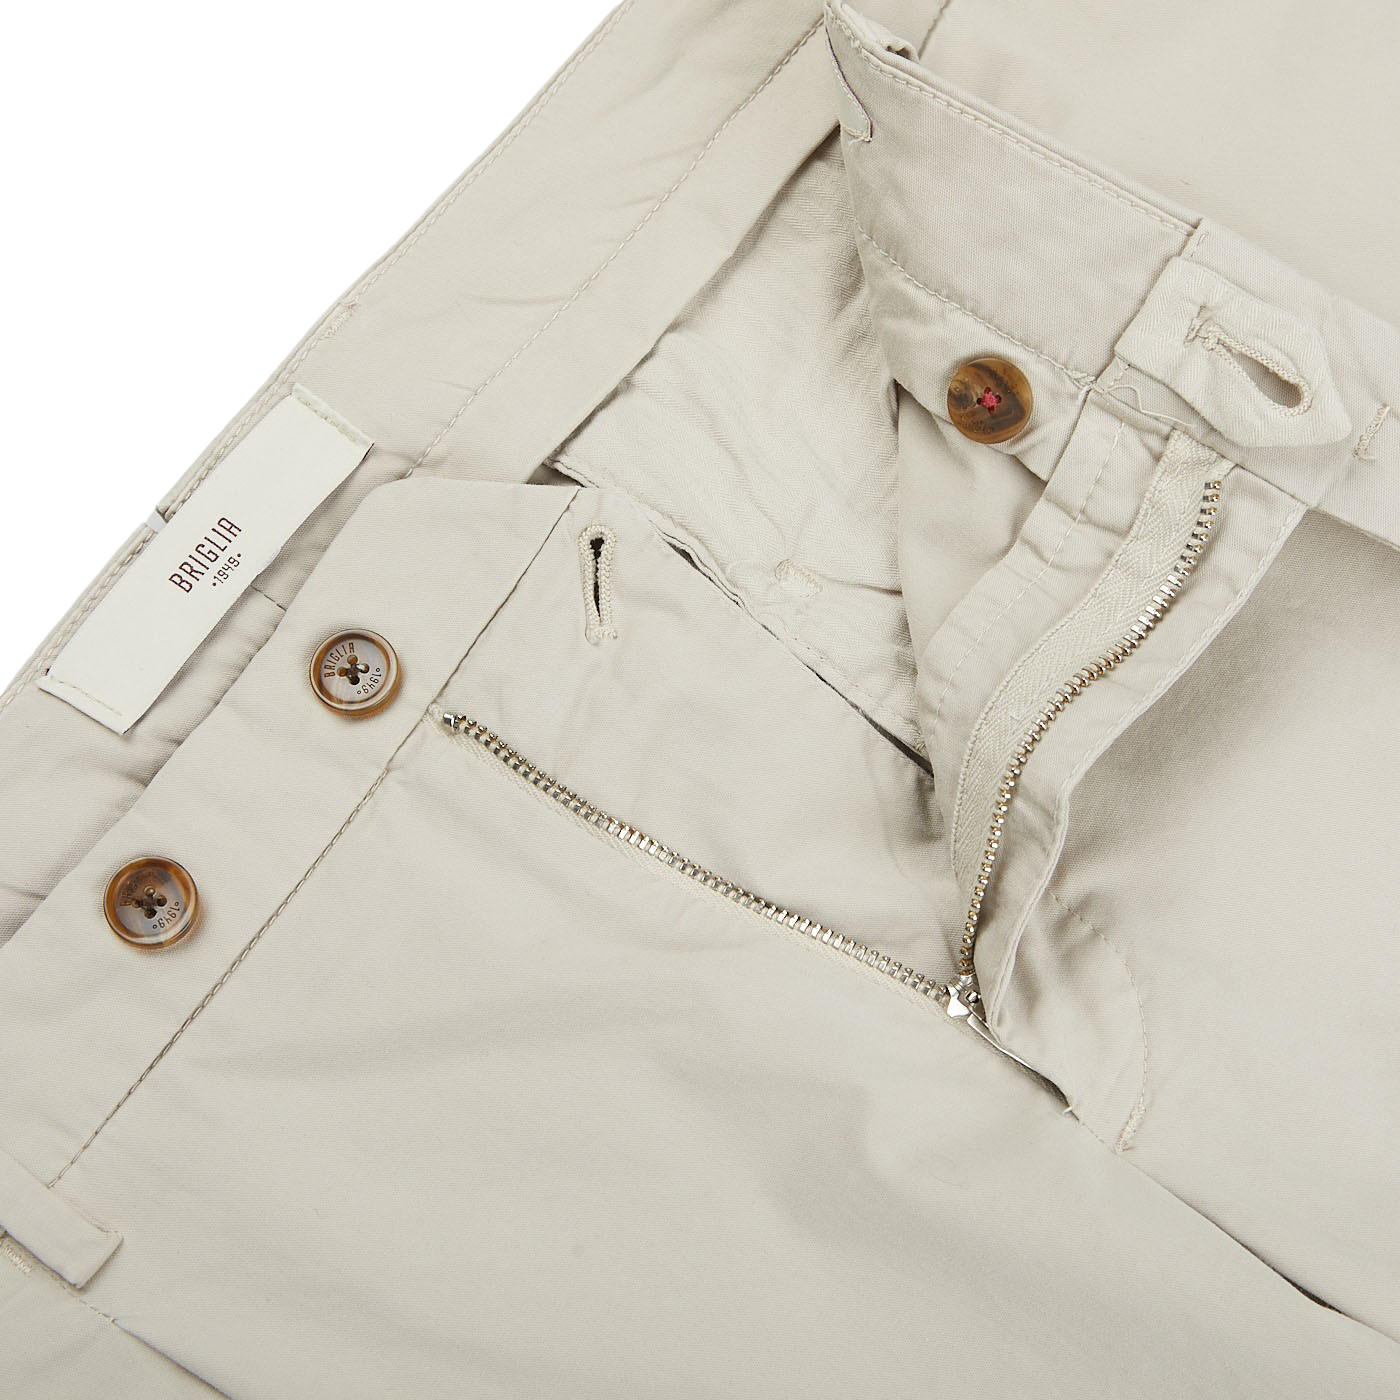 The back pocket of Light Beige Cotton Stretch BG07 Pleated Chinos, made from cotton with a touch of stretch by Italian trouser specialist Briglia.